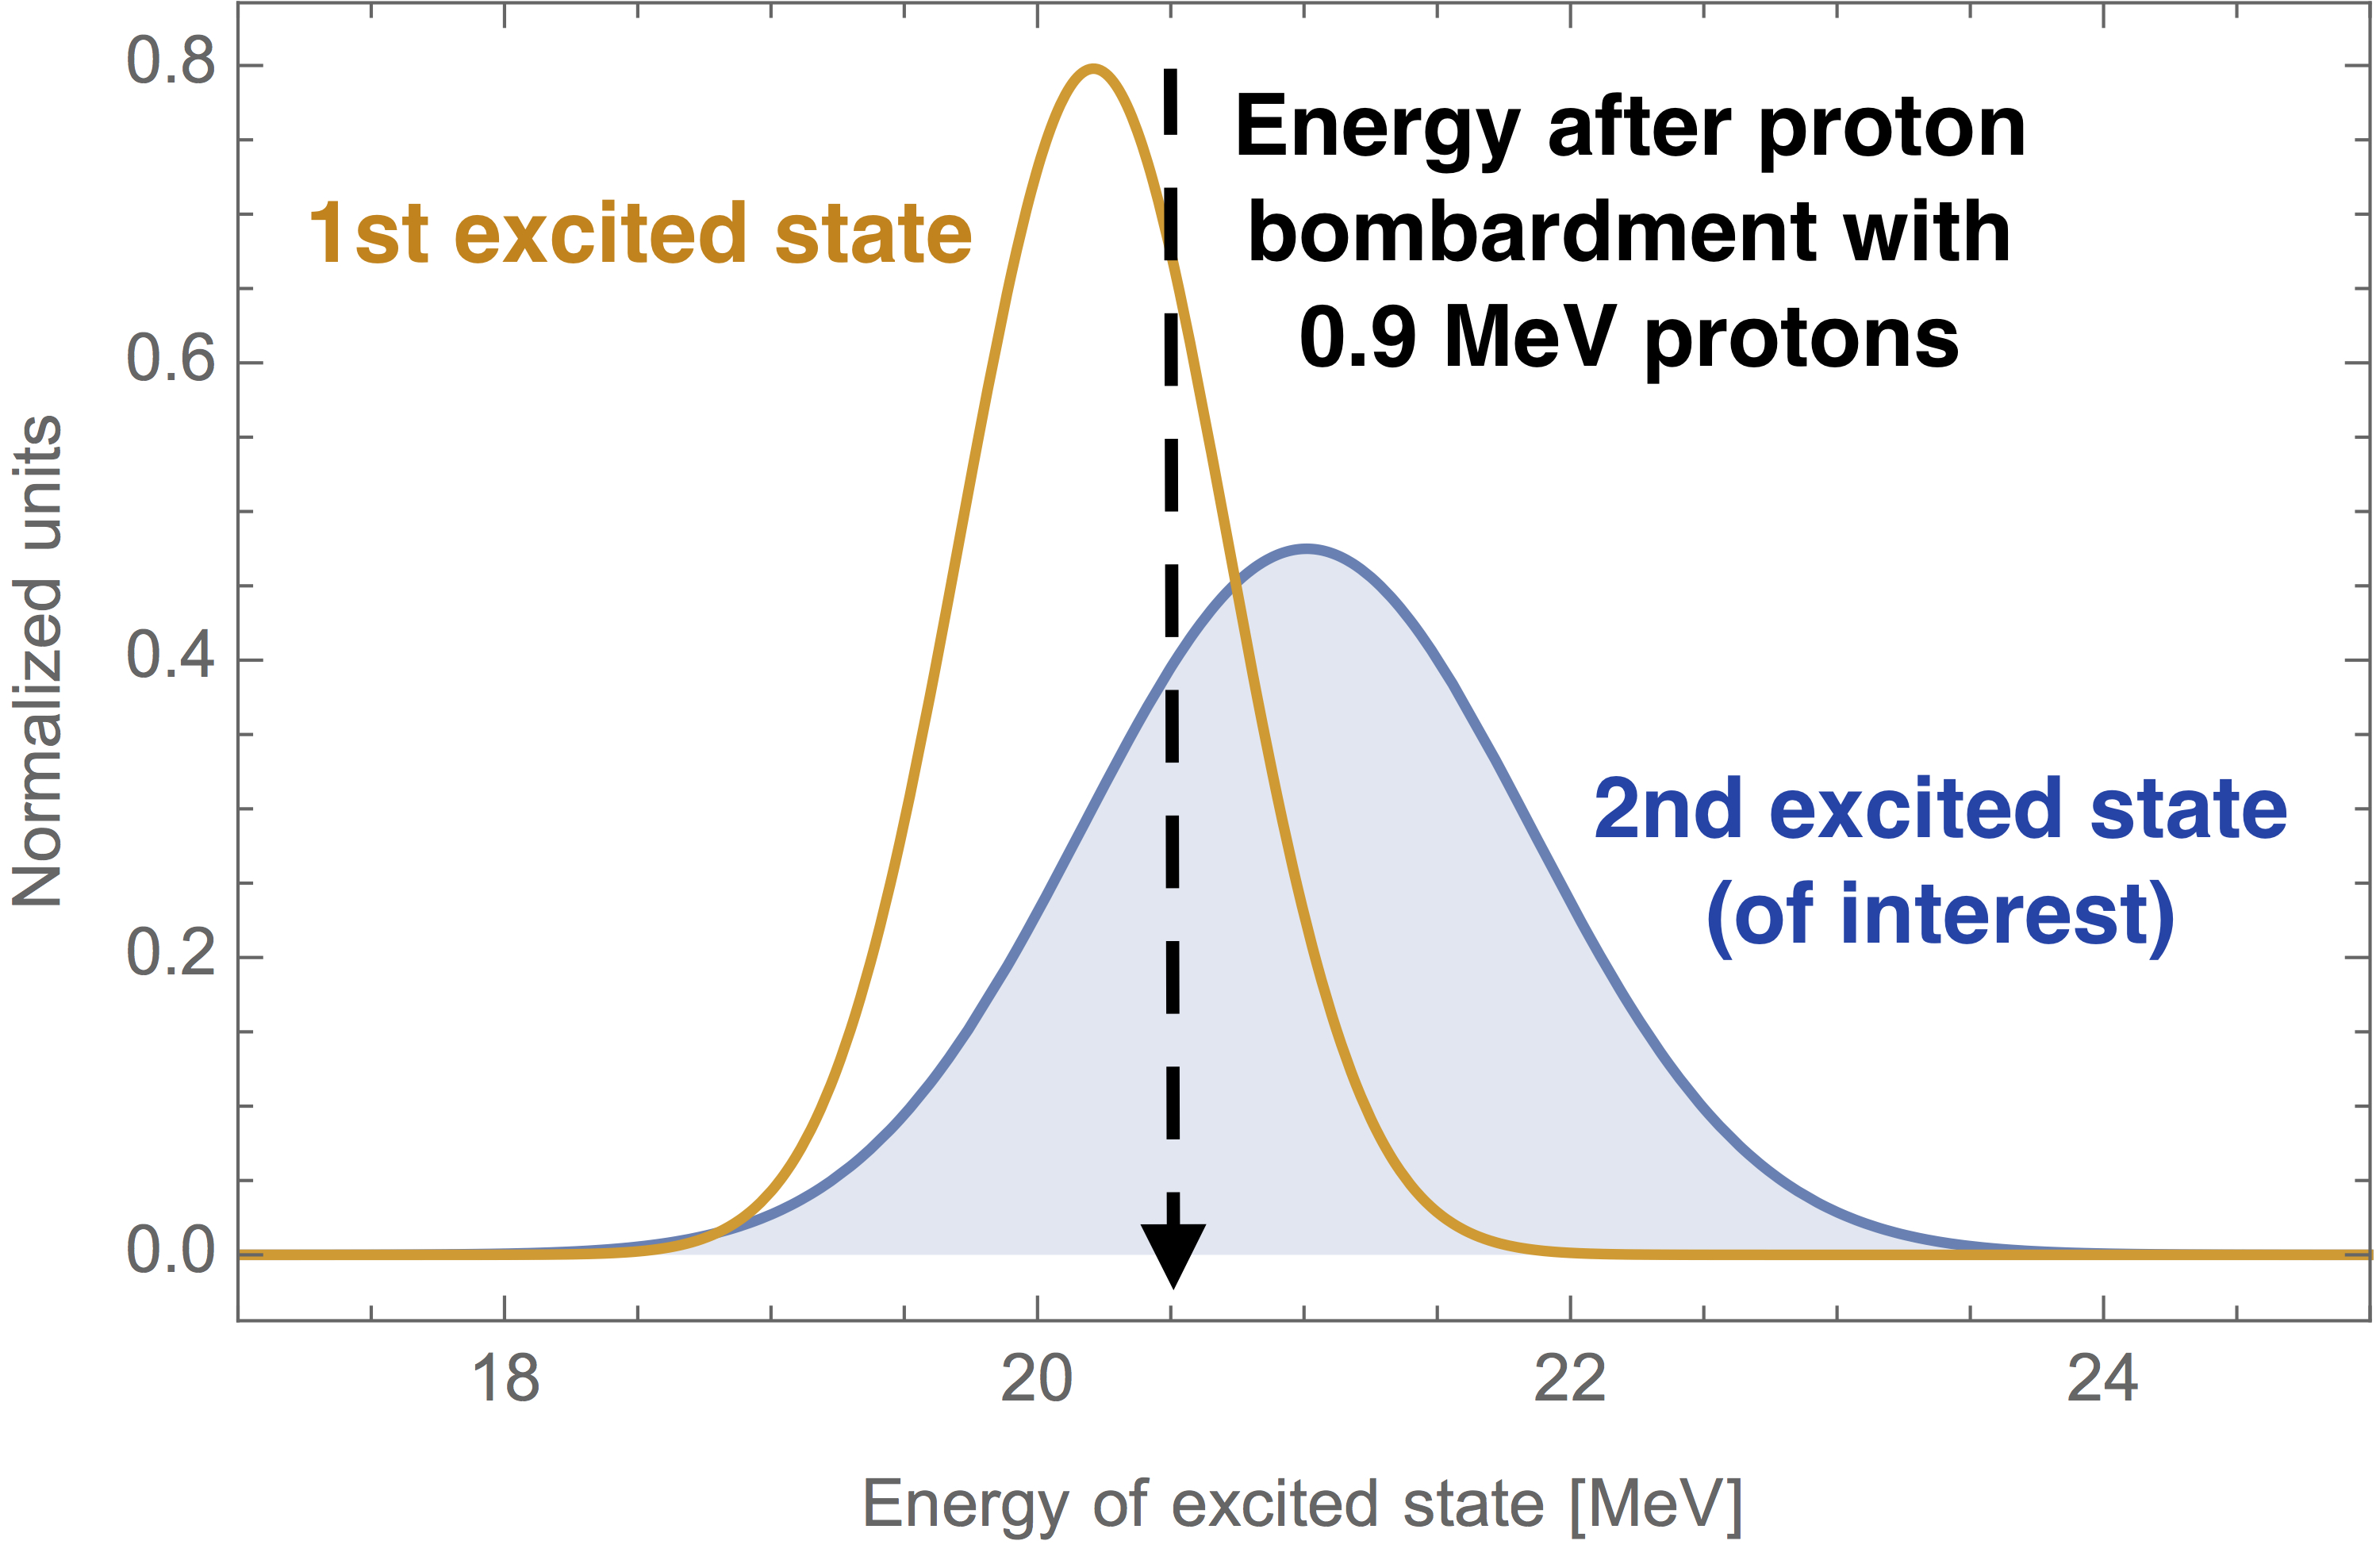 How much top quark is in the proton? – ParticleBites